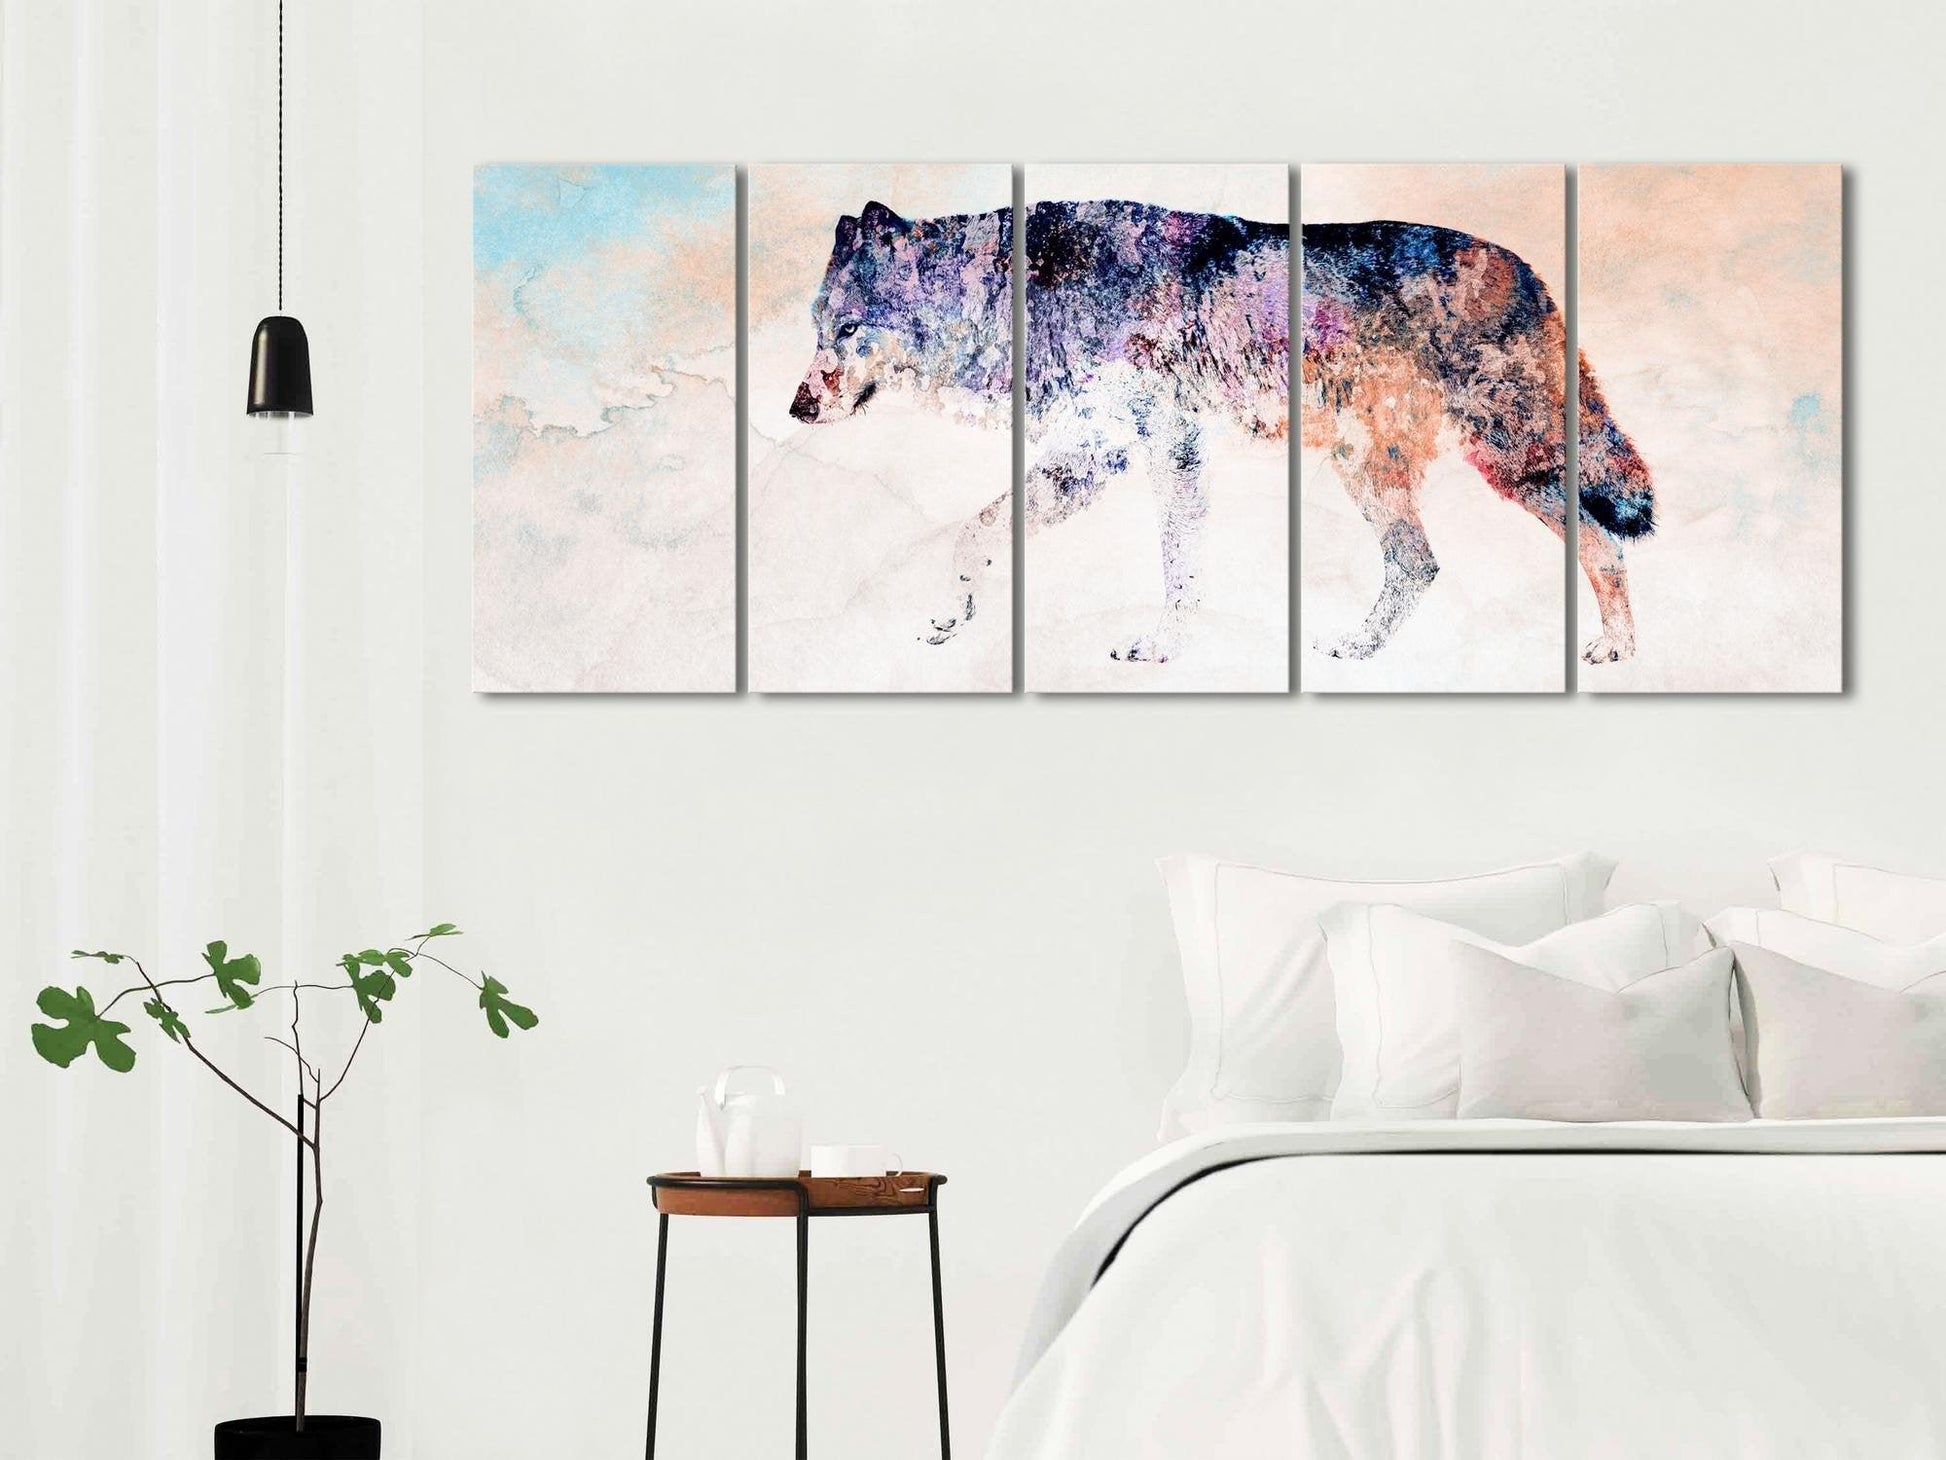 Canvas Print - Lonely Wolf (5 Parts) Narrow - www.trendingbestsellers.com